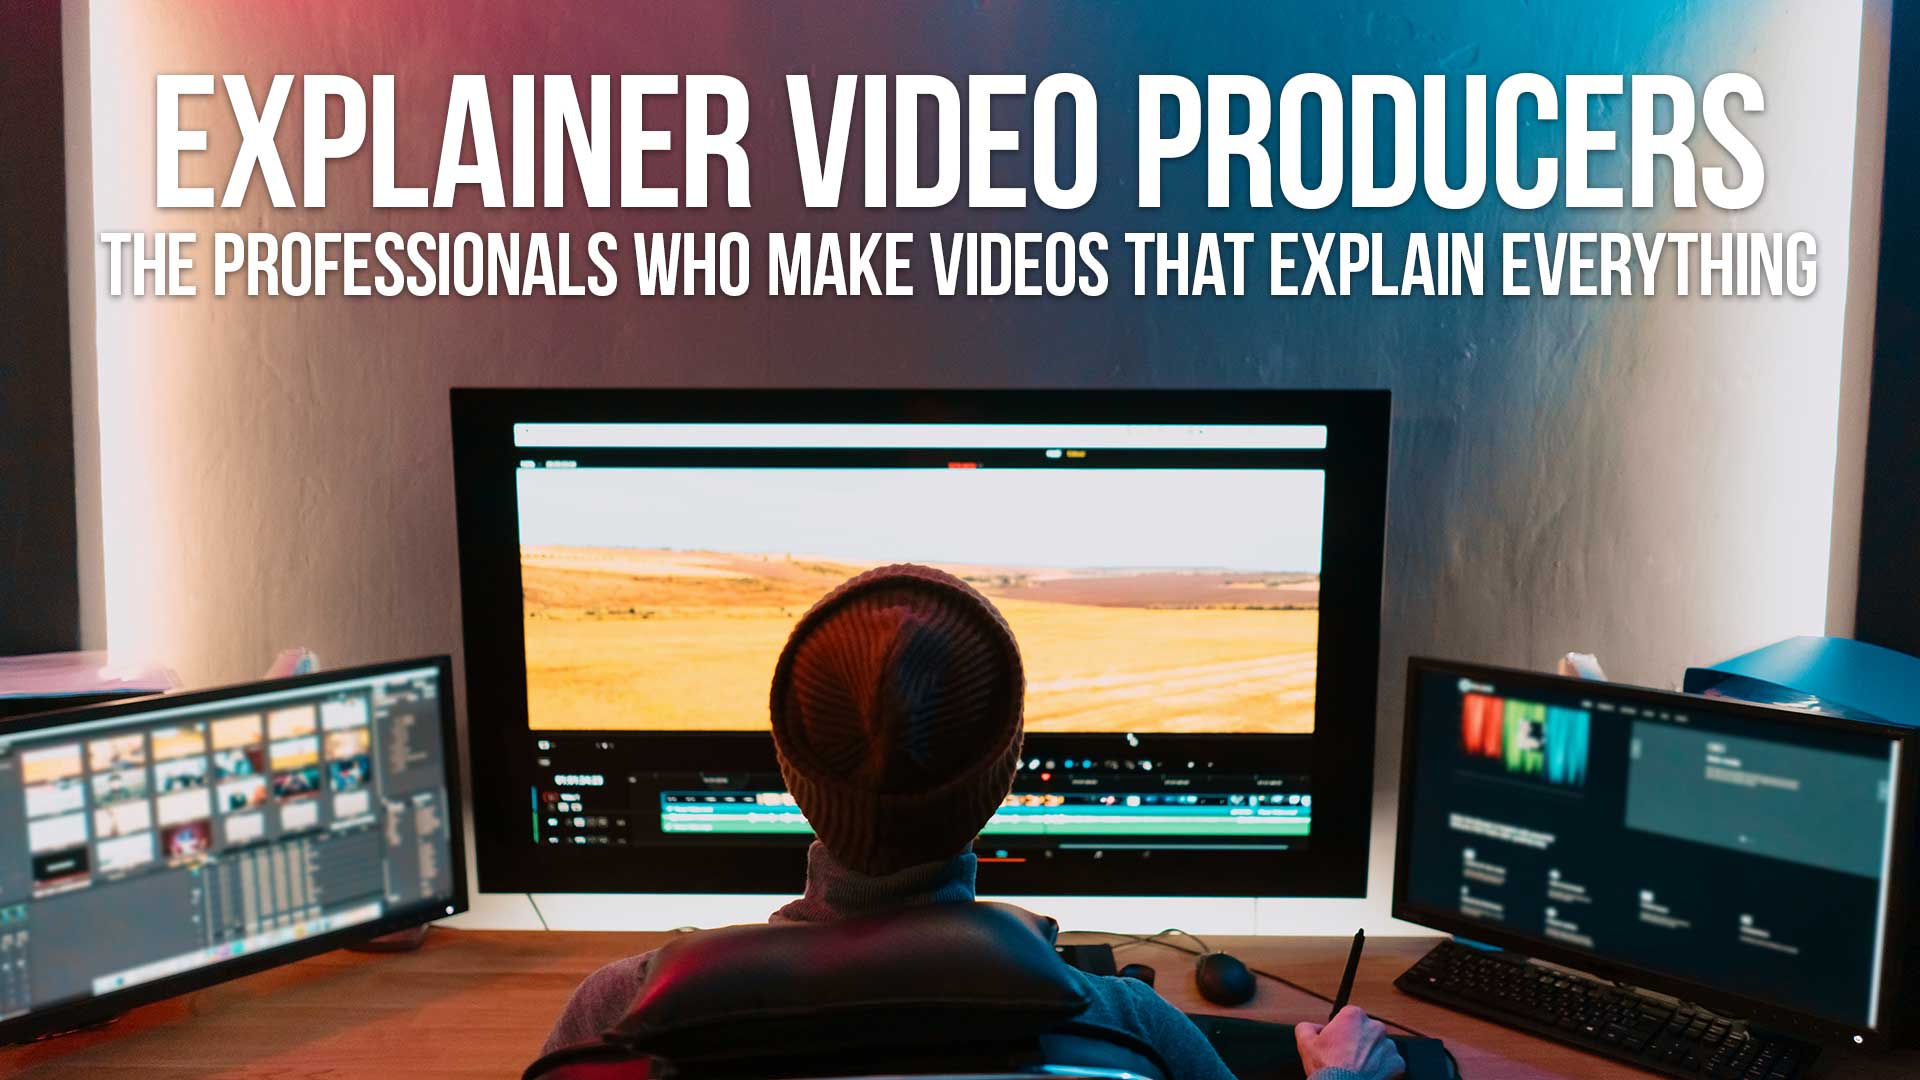 Explainer Video Producers - The Professionals Who Make Videos That Explain Everything